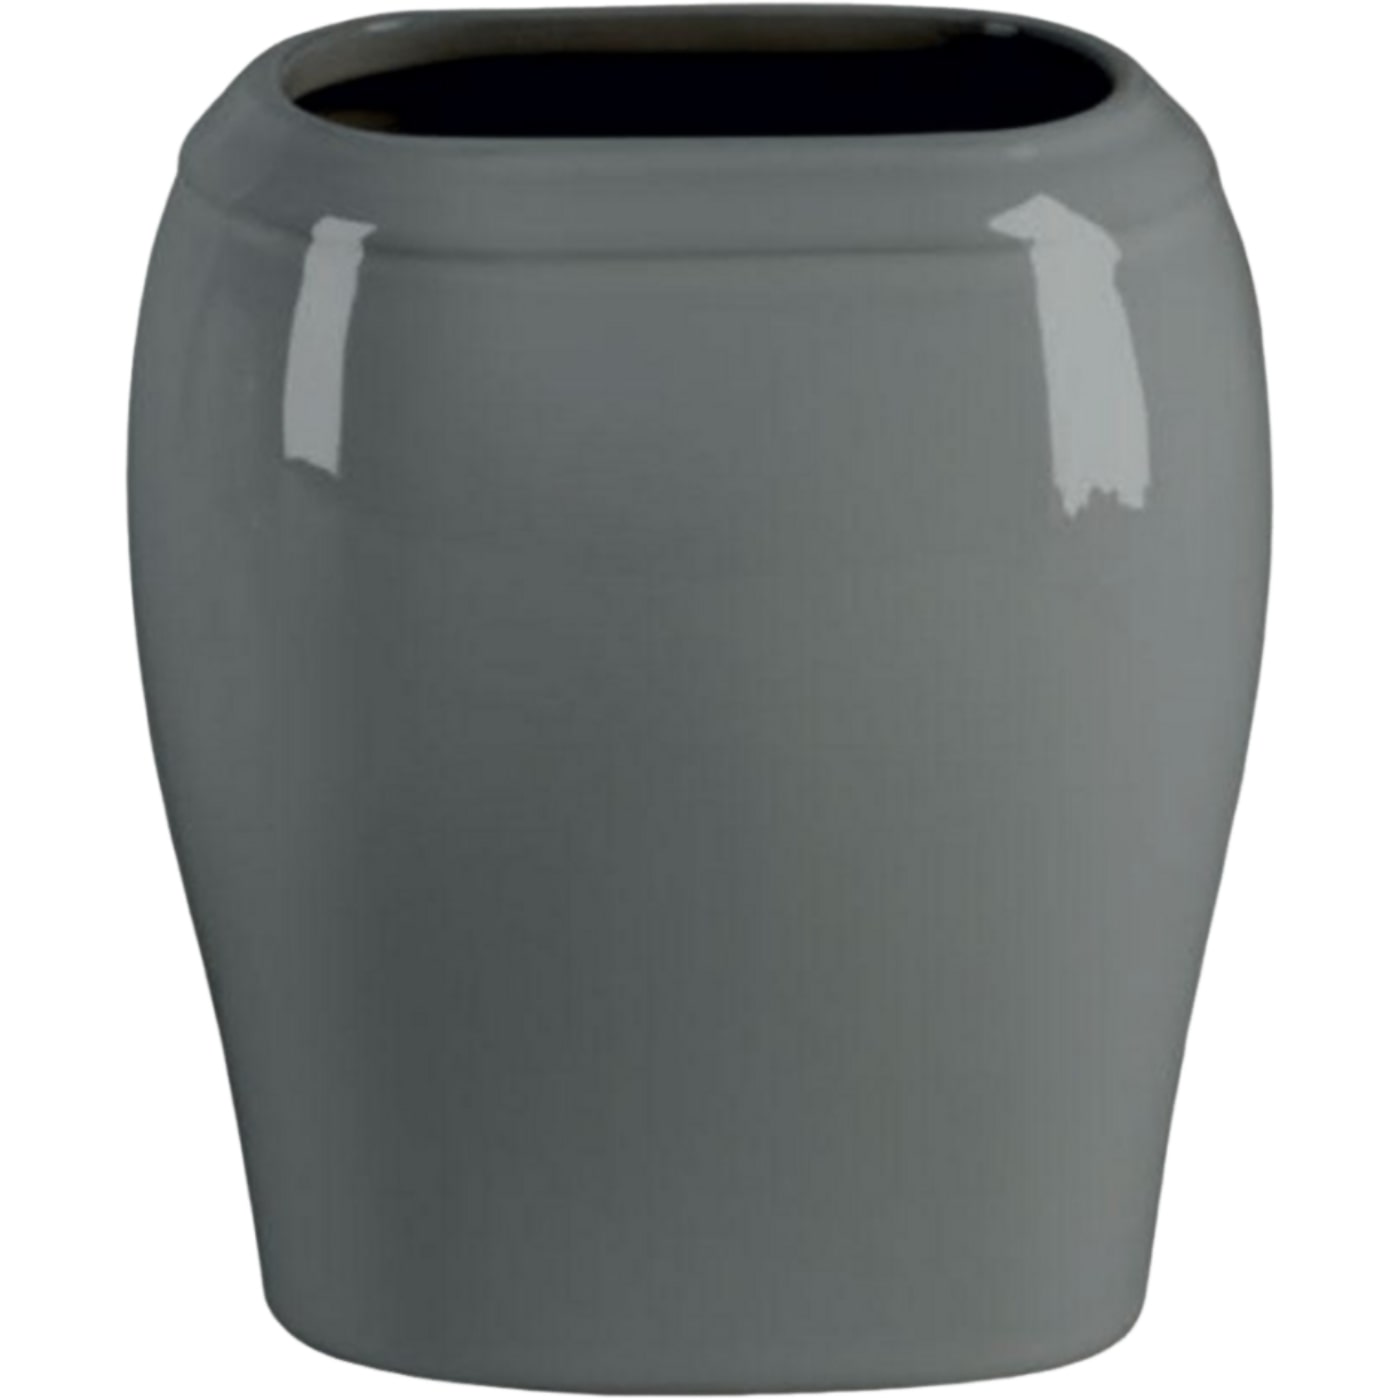 Rectangular grave vase Liscia gray 19x17cm - 7.5x6.7in In gray porcelain, wall attached LI142P/G